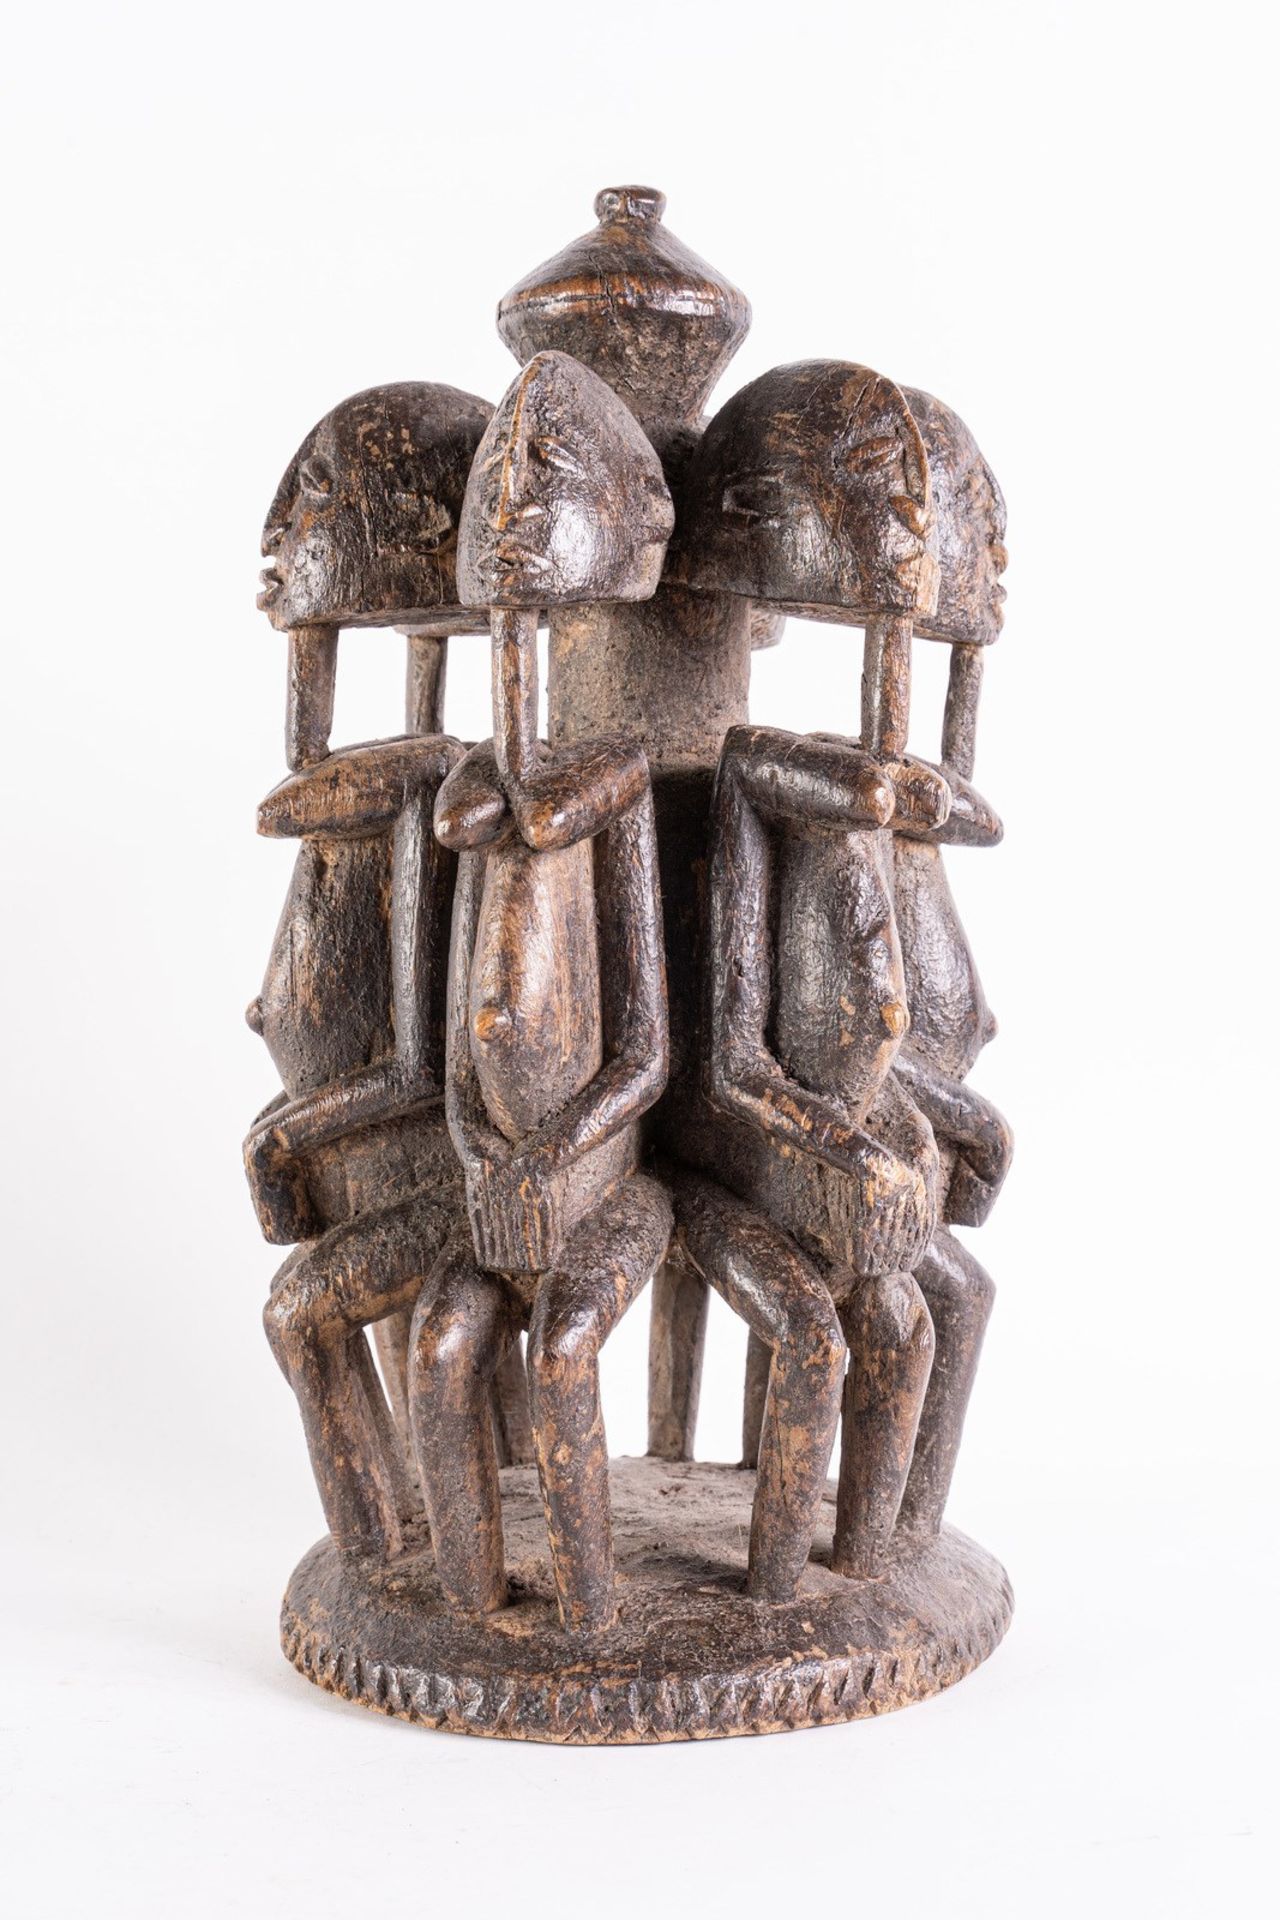 Arte africana Altar with figures, DogonMali. - Image 2 of 4